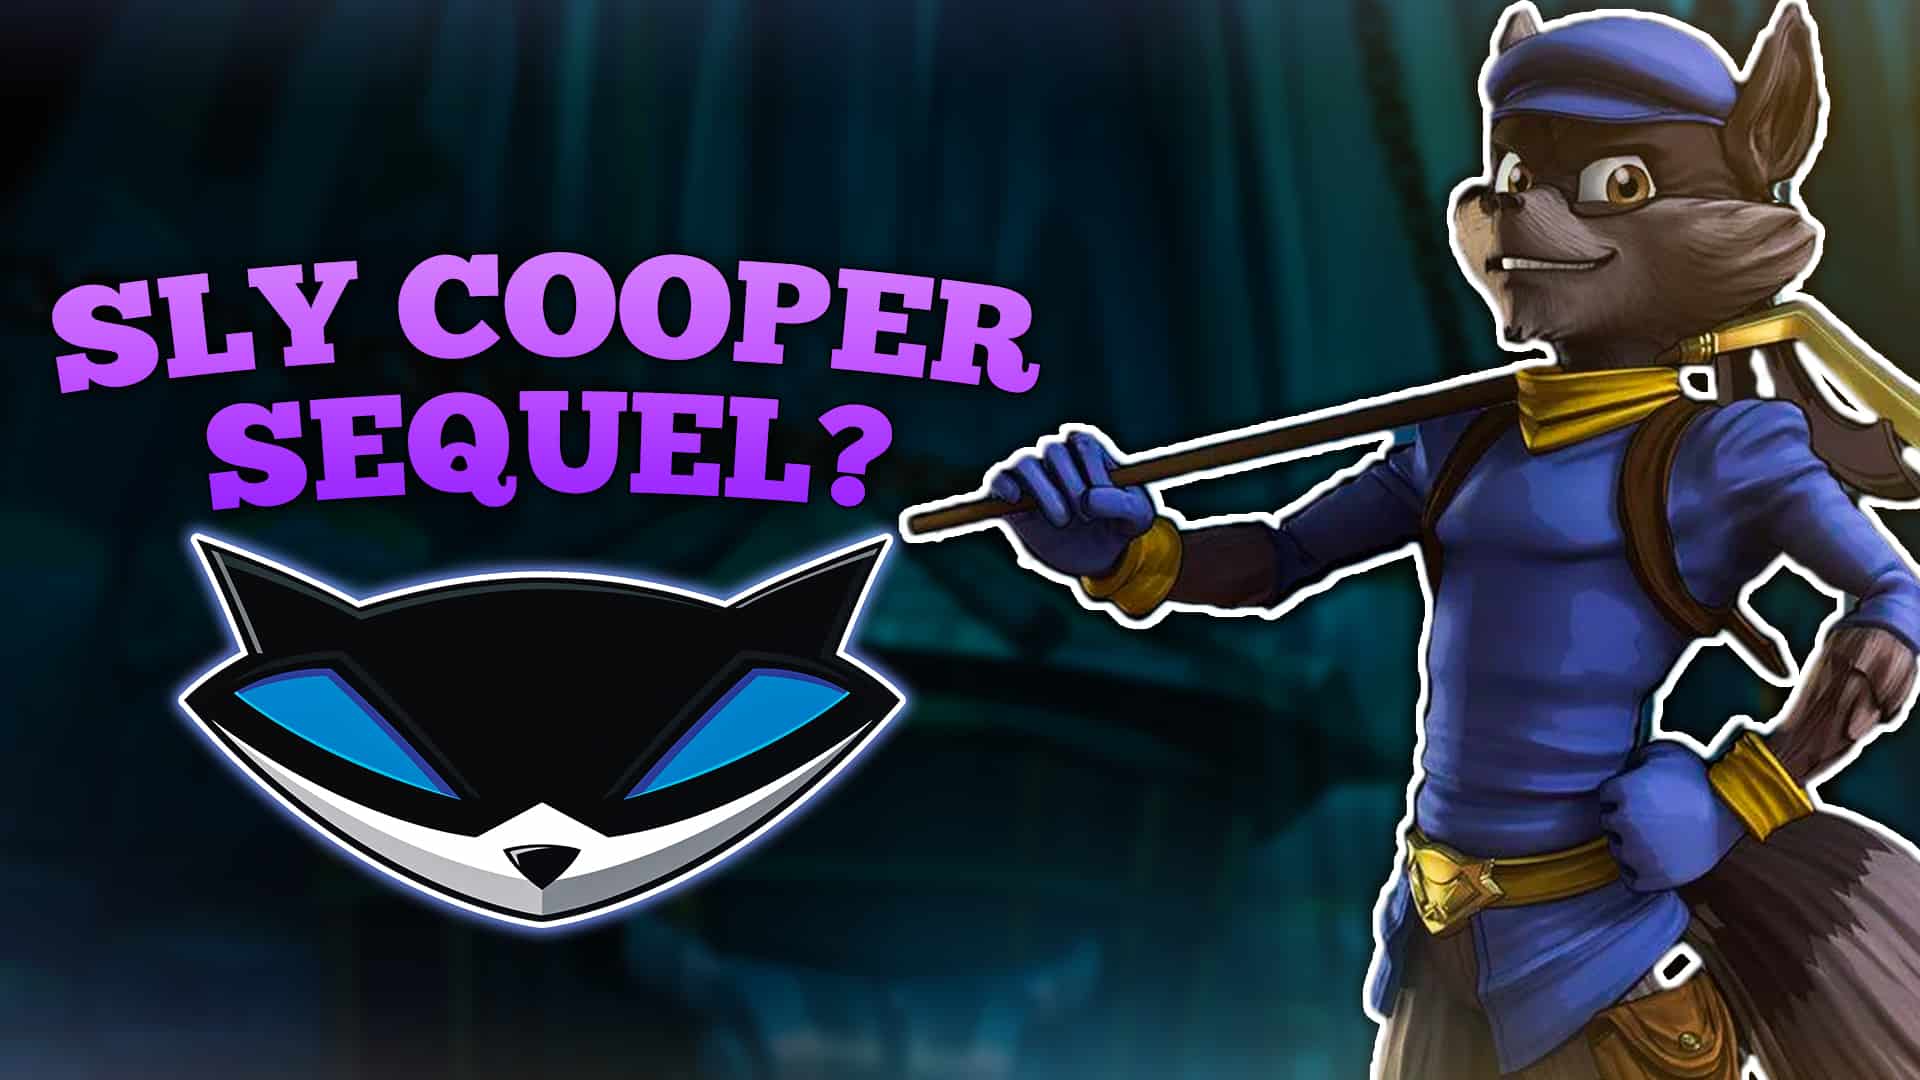 Sly Cooper may be coming to a new game